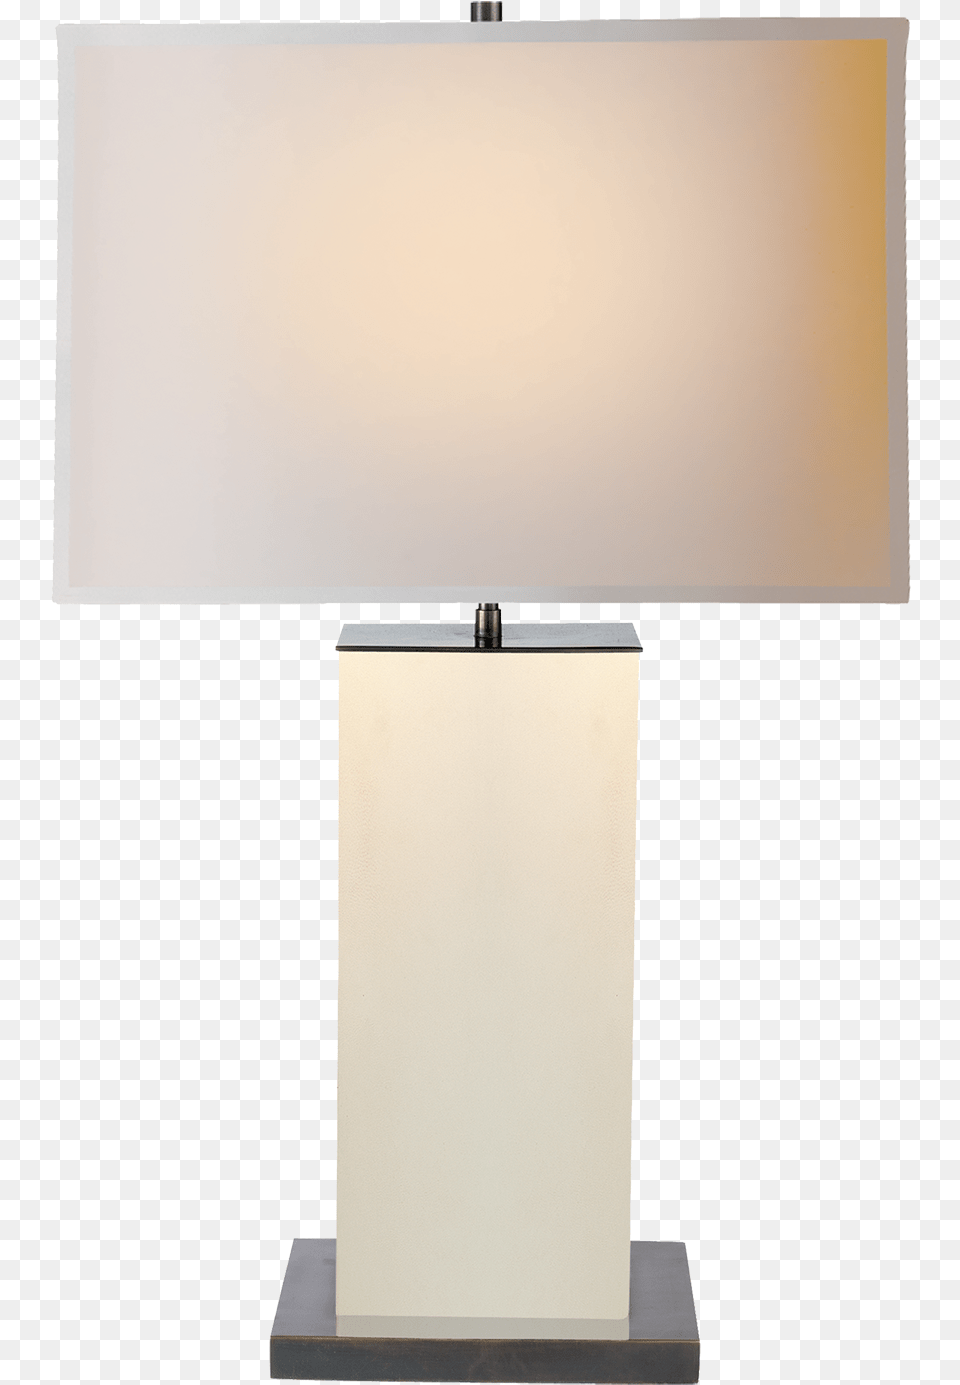 Dixon Tall Table Lamp In Parchment Leather With Natural Visual Comfort Dixon Lamp, Table Lamp, Lampshade, White Board, Mailbox Free Png Download